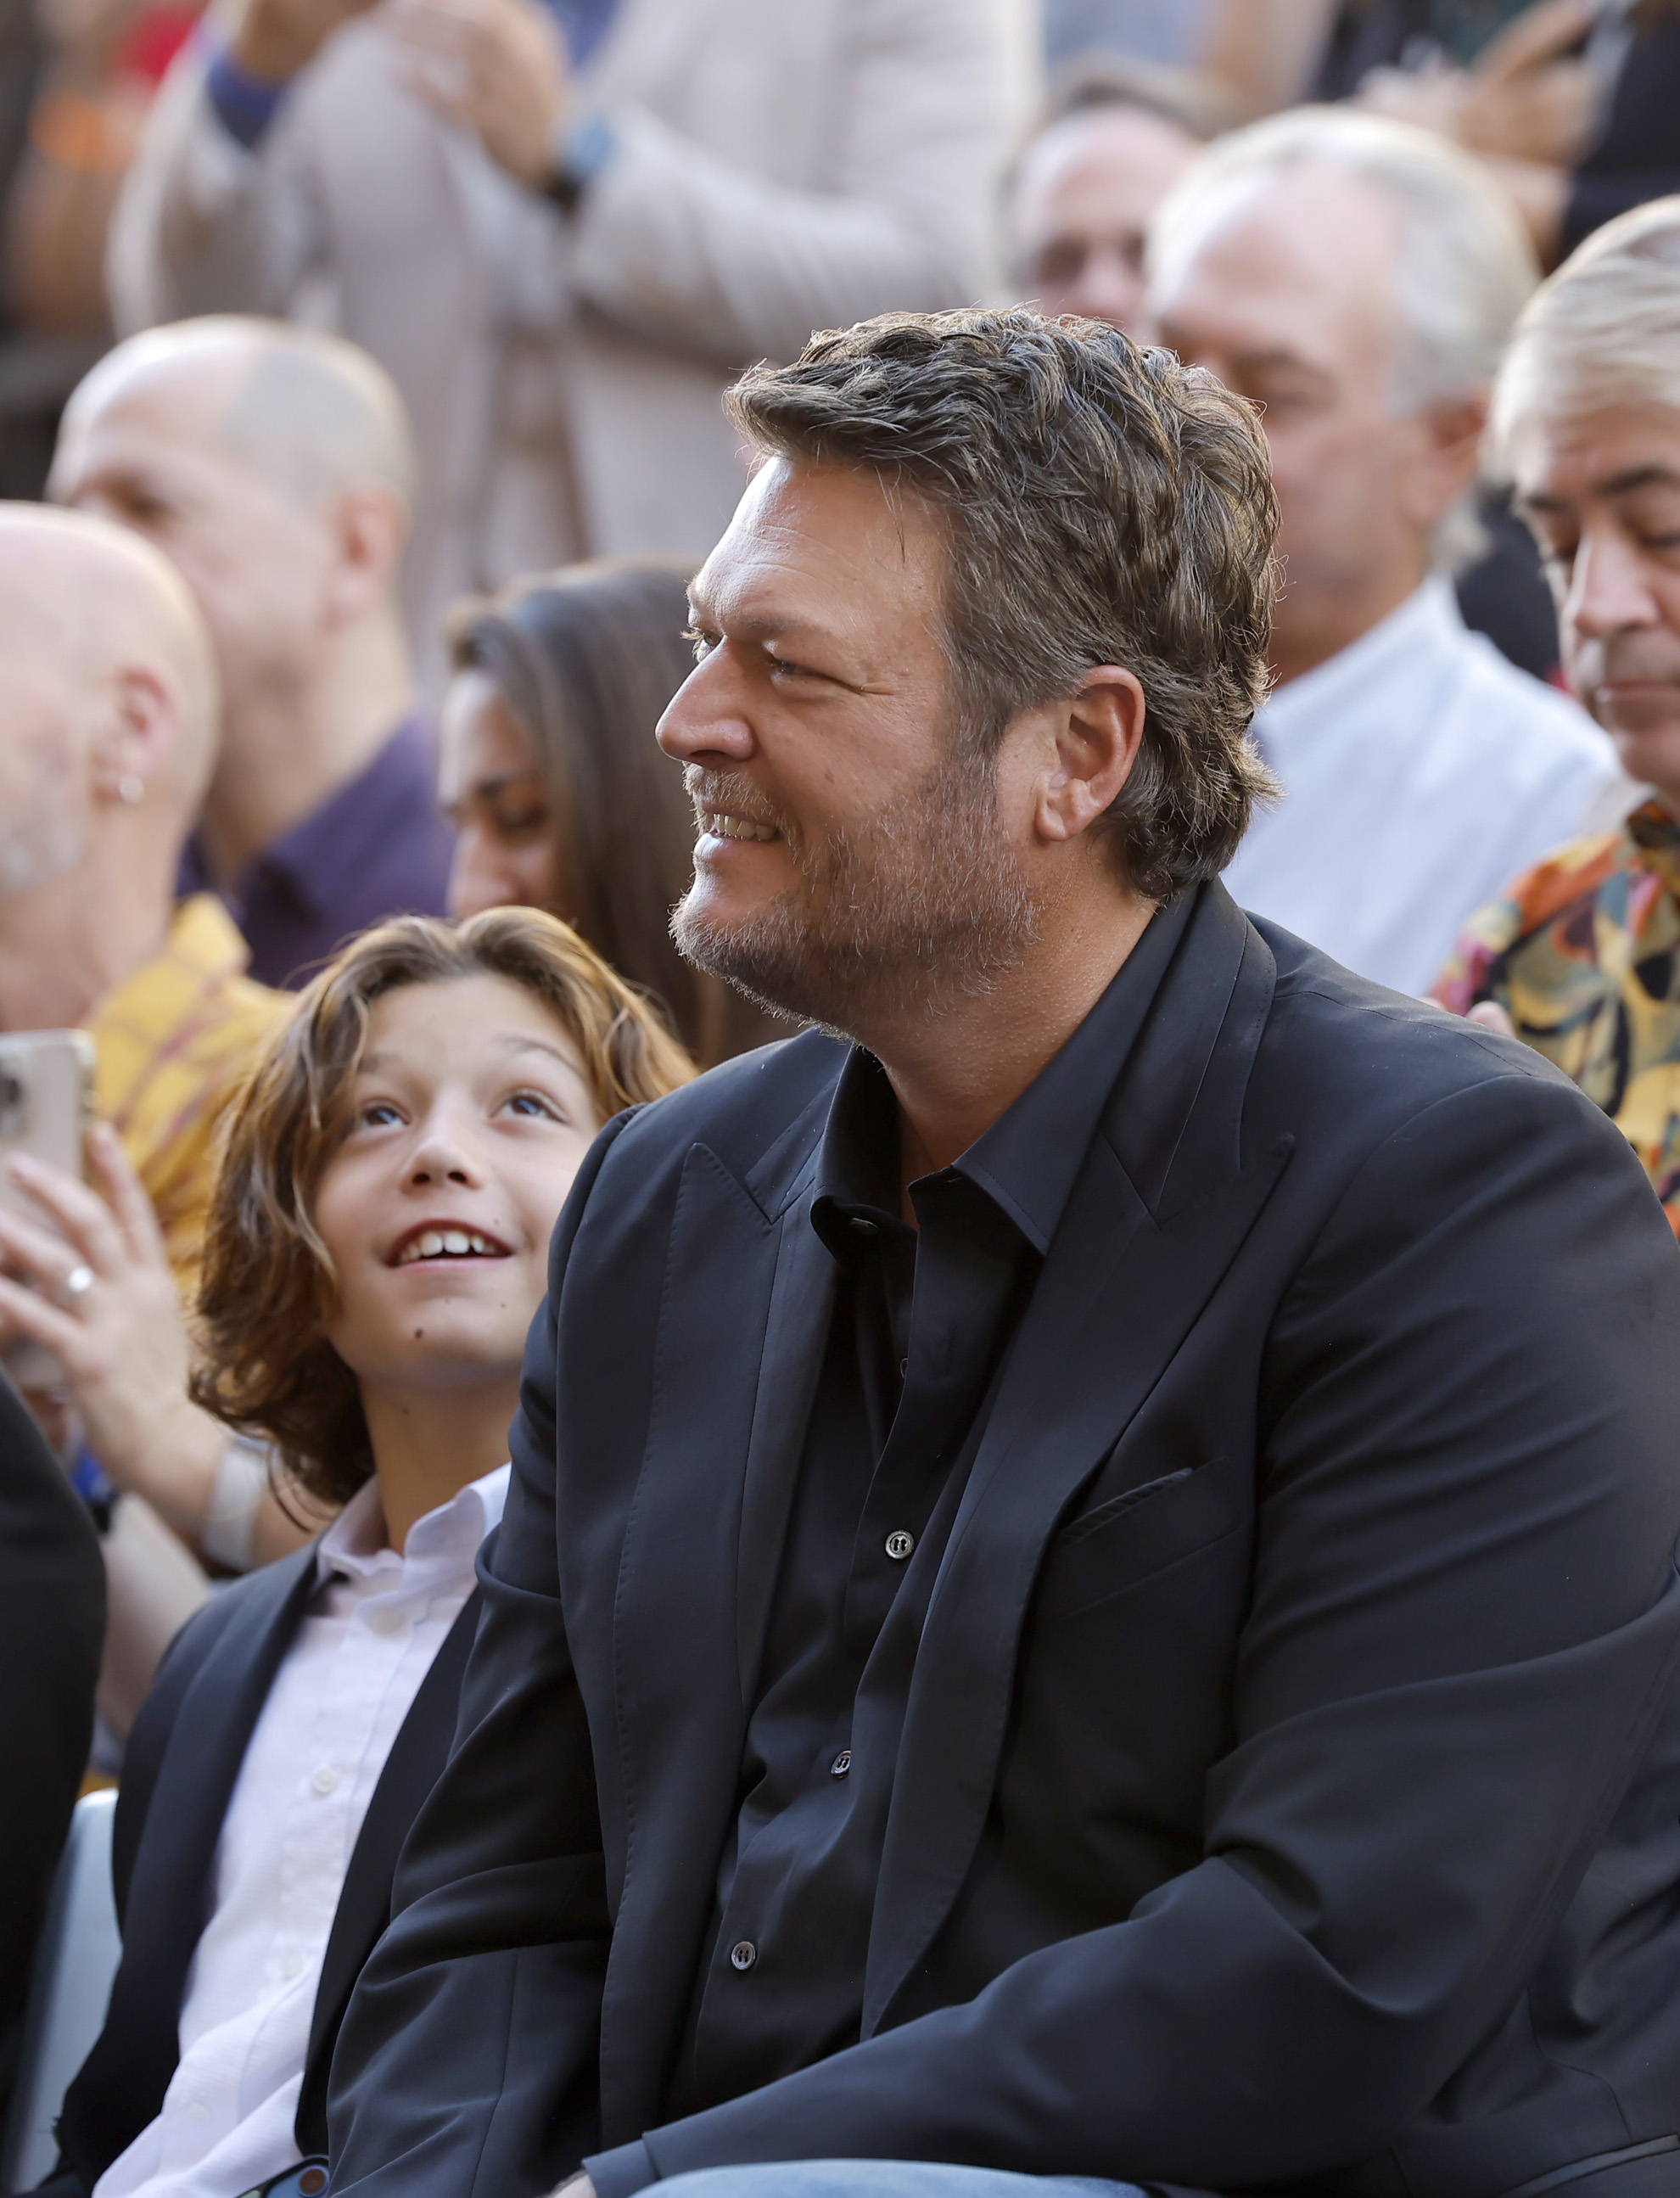 Apollo Rossdale and Blake Shelton attend the Hollywood Walk of Fame Star Ceremony Honoring Gwen Stefani in Hollywood, California, on October 19, 2023. | Source: Getty Images